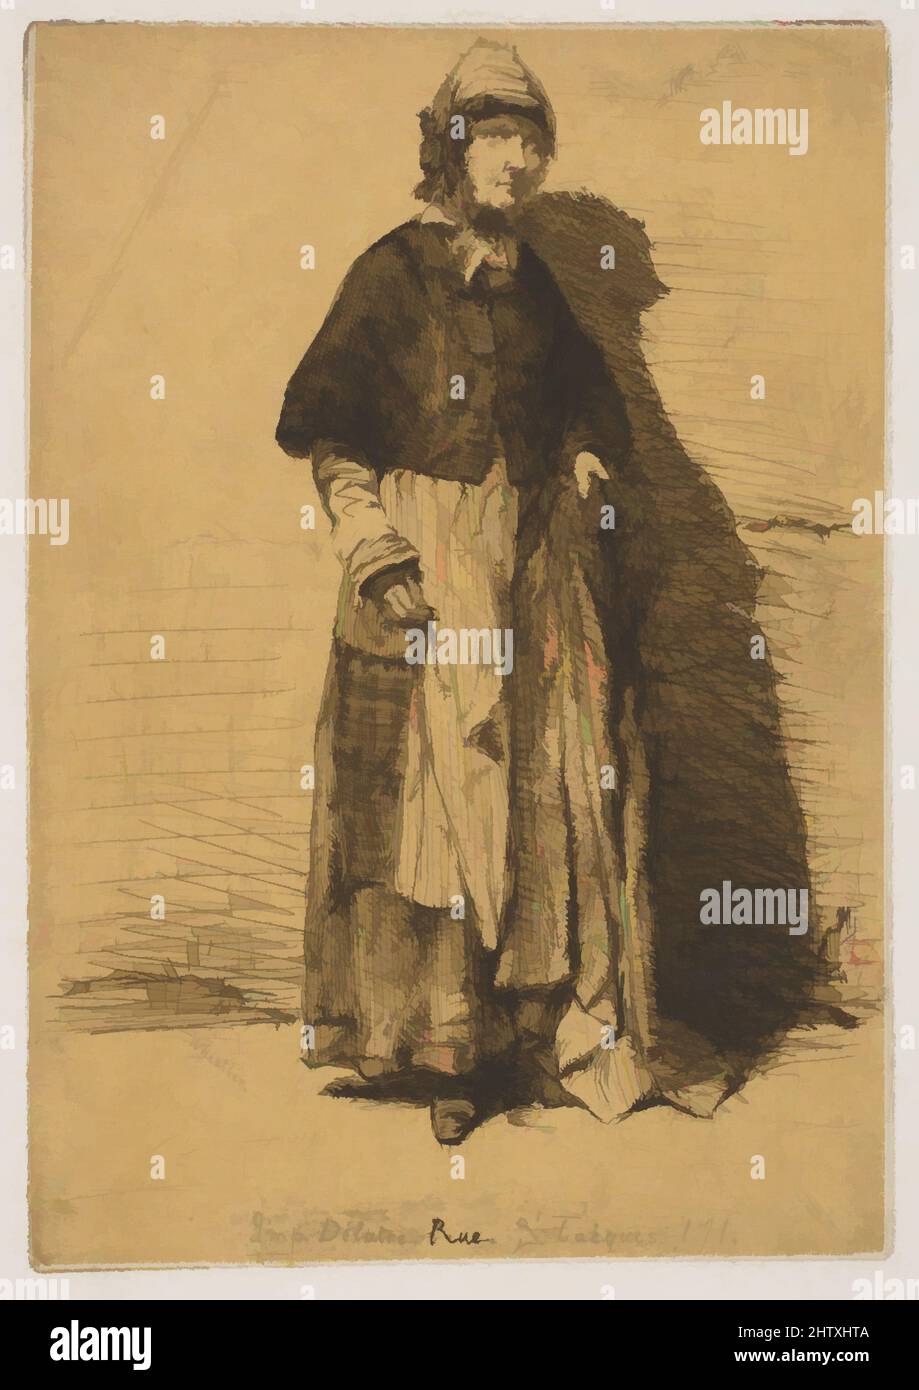 Art inspired by La Mère Gérard, 1858, Etching; fourth state of four (Glasgow); printed in black ink on tan chine on off-white wove paper (chine collé), plate: 5 x 3 1/2 in. (12.7 x 8.9 cm), Prints, James McNeill Whistler (American, Lowell, Massachusetts 1834–1903 London, Classic works modernized by Artotop with a splash of modernity. Shapes, color and value, eye-catching visual impact on art. Emotions through freedom of artworks in a contemporary way. A timeless message pursuing a wildly creative new direction. Artists turning to the digital medium and creating the Artotop NFT Stock Photo